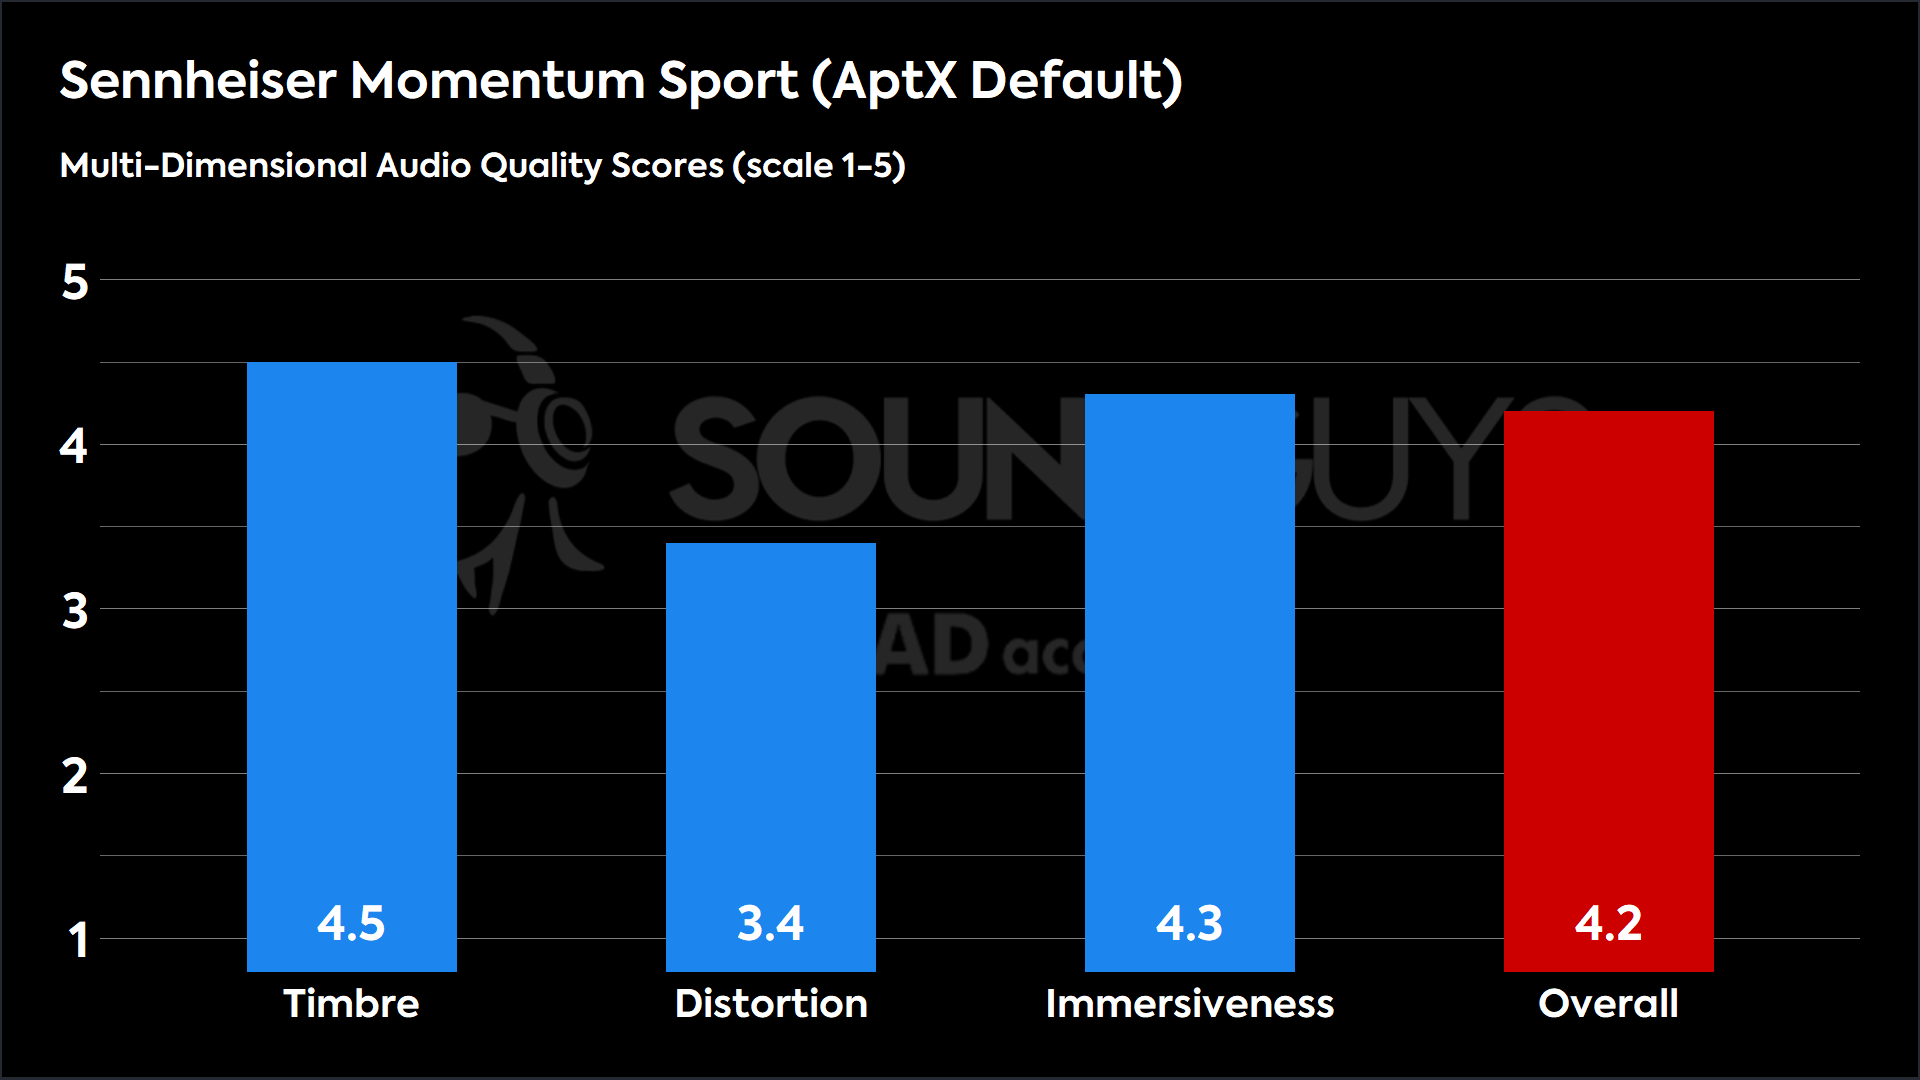 This chart shows the MDAQS results for the Sennheiser Momentum Sport in AptX Default mode. The Timbre score is 4.5, The Distortion score is 3.4, the Immersiveness score is 4.3, and the Overall Score is 4.2.